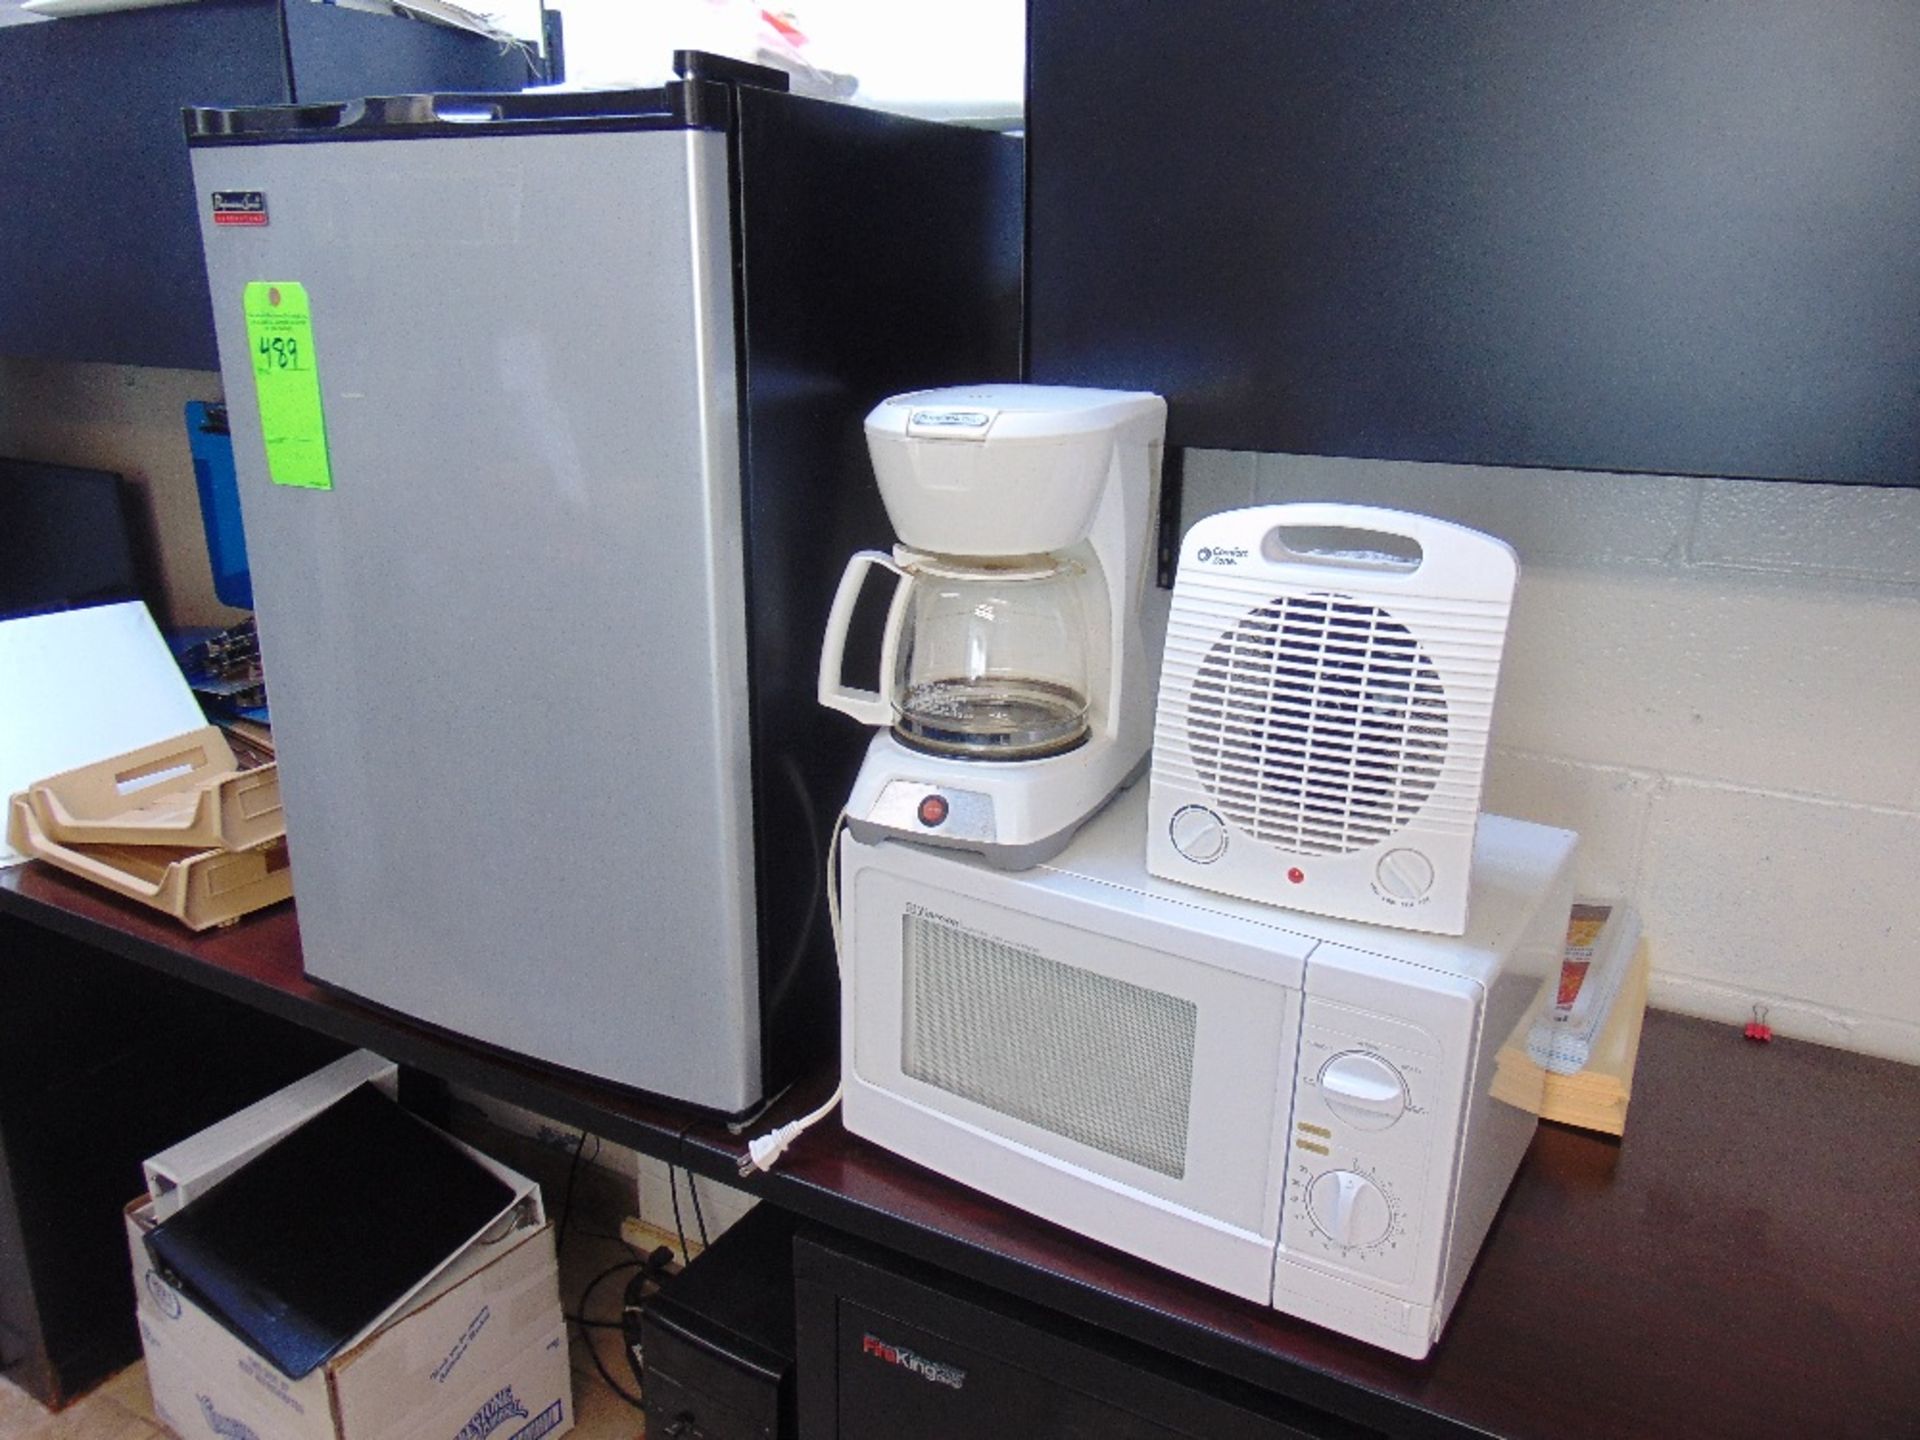 Lot with Criterion Mini Refrigerator with Freezer compartment, Emerson Microwave Oven, Coffee